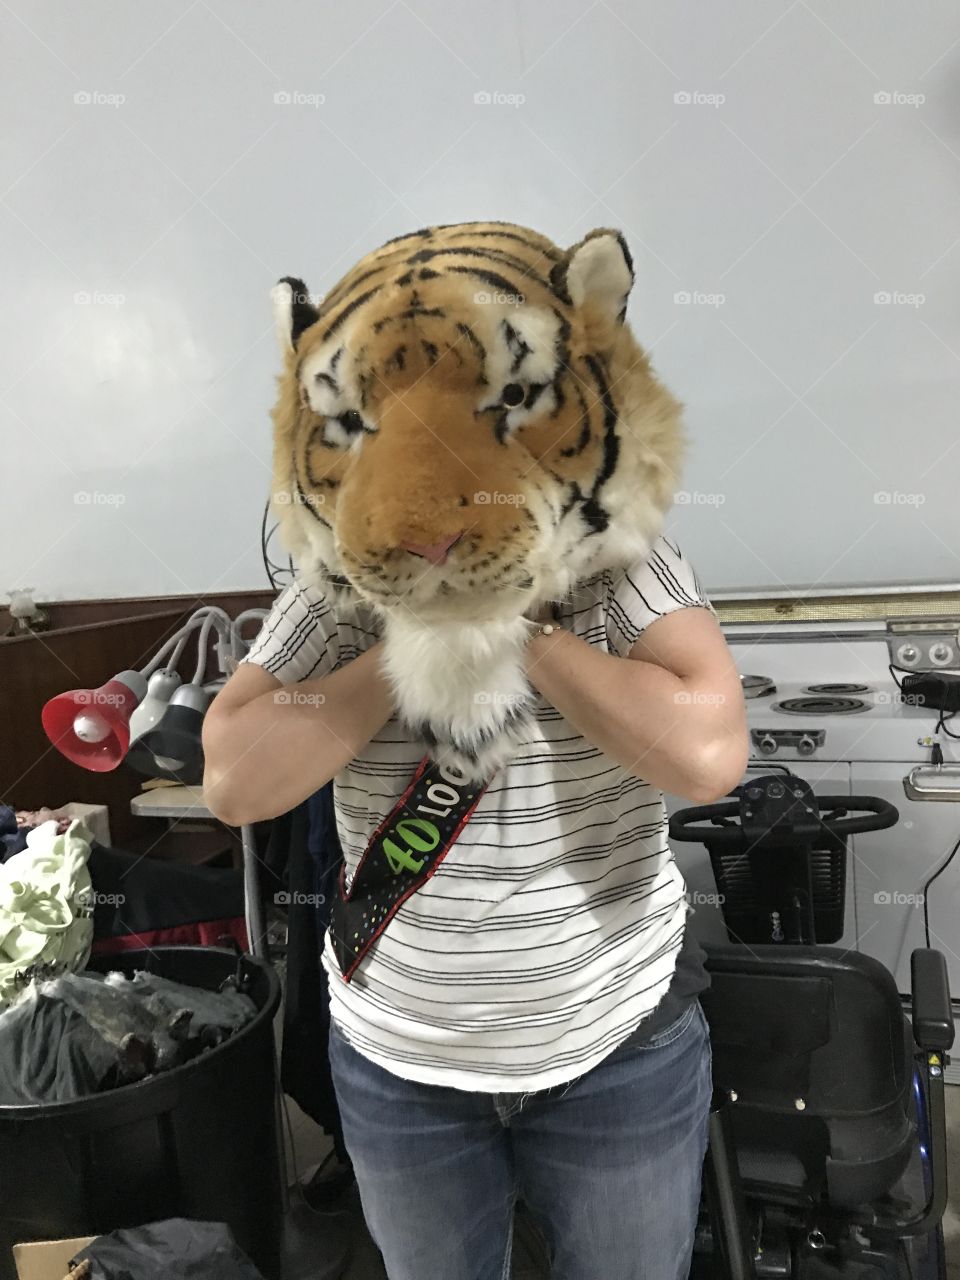 40-year-old wearing tiger head